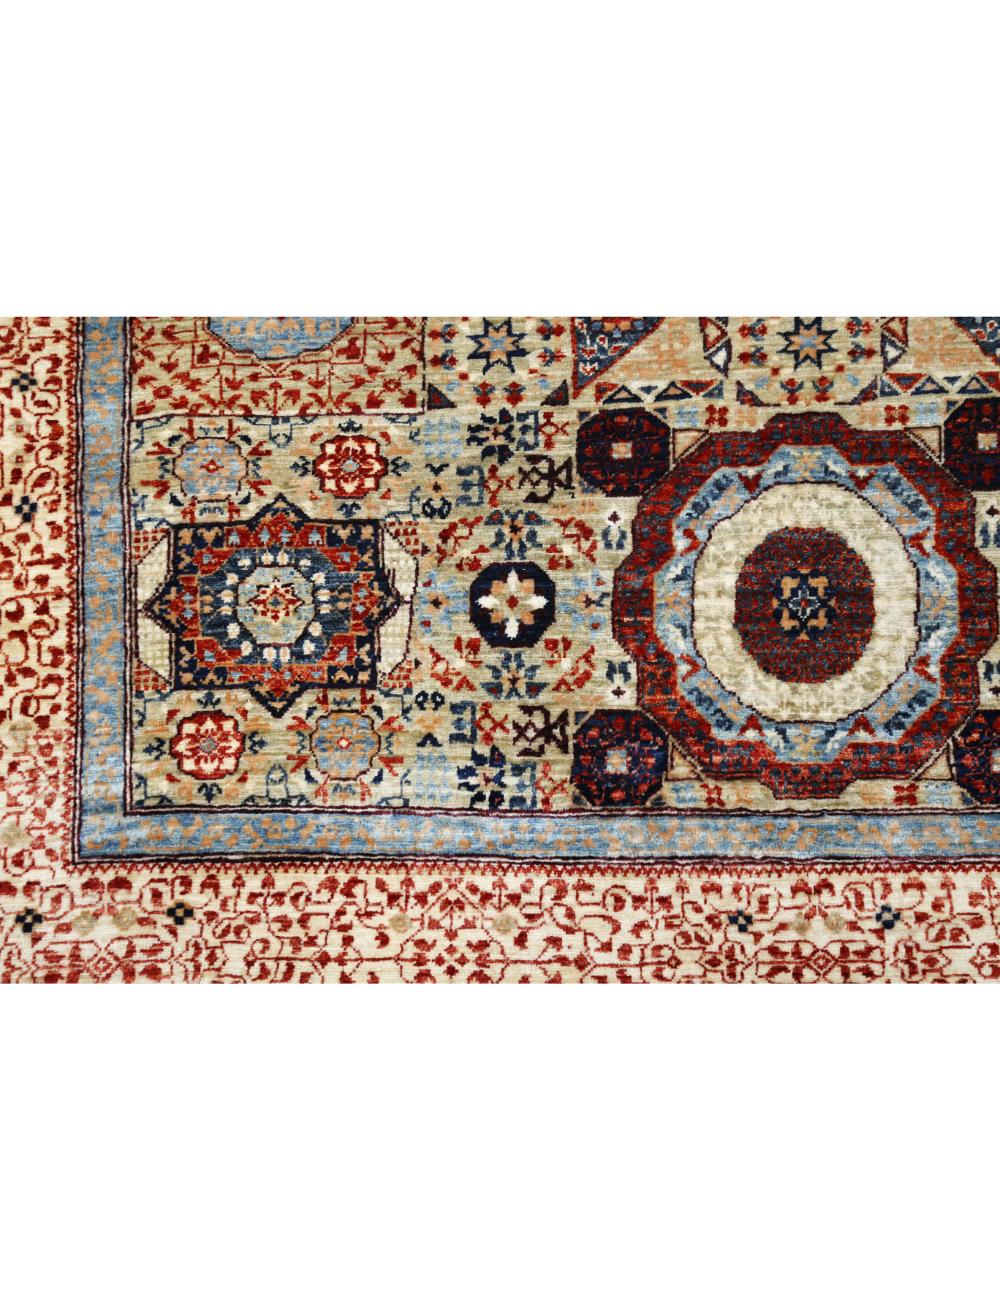 Mamluk 4' 11" X 6' 9" Hand-Knotted Wool Rug 4' 11" X 6' 9" (150 X 206) / Beige / Red